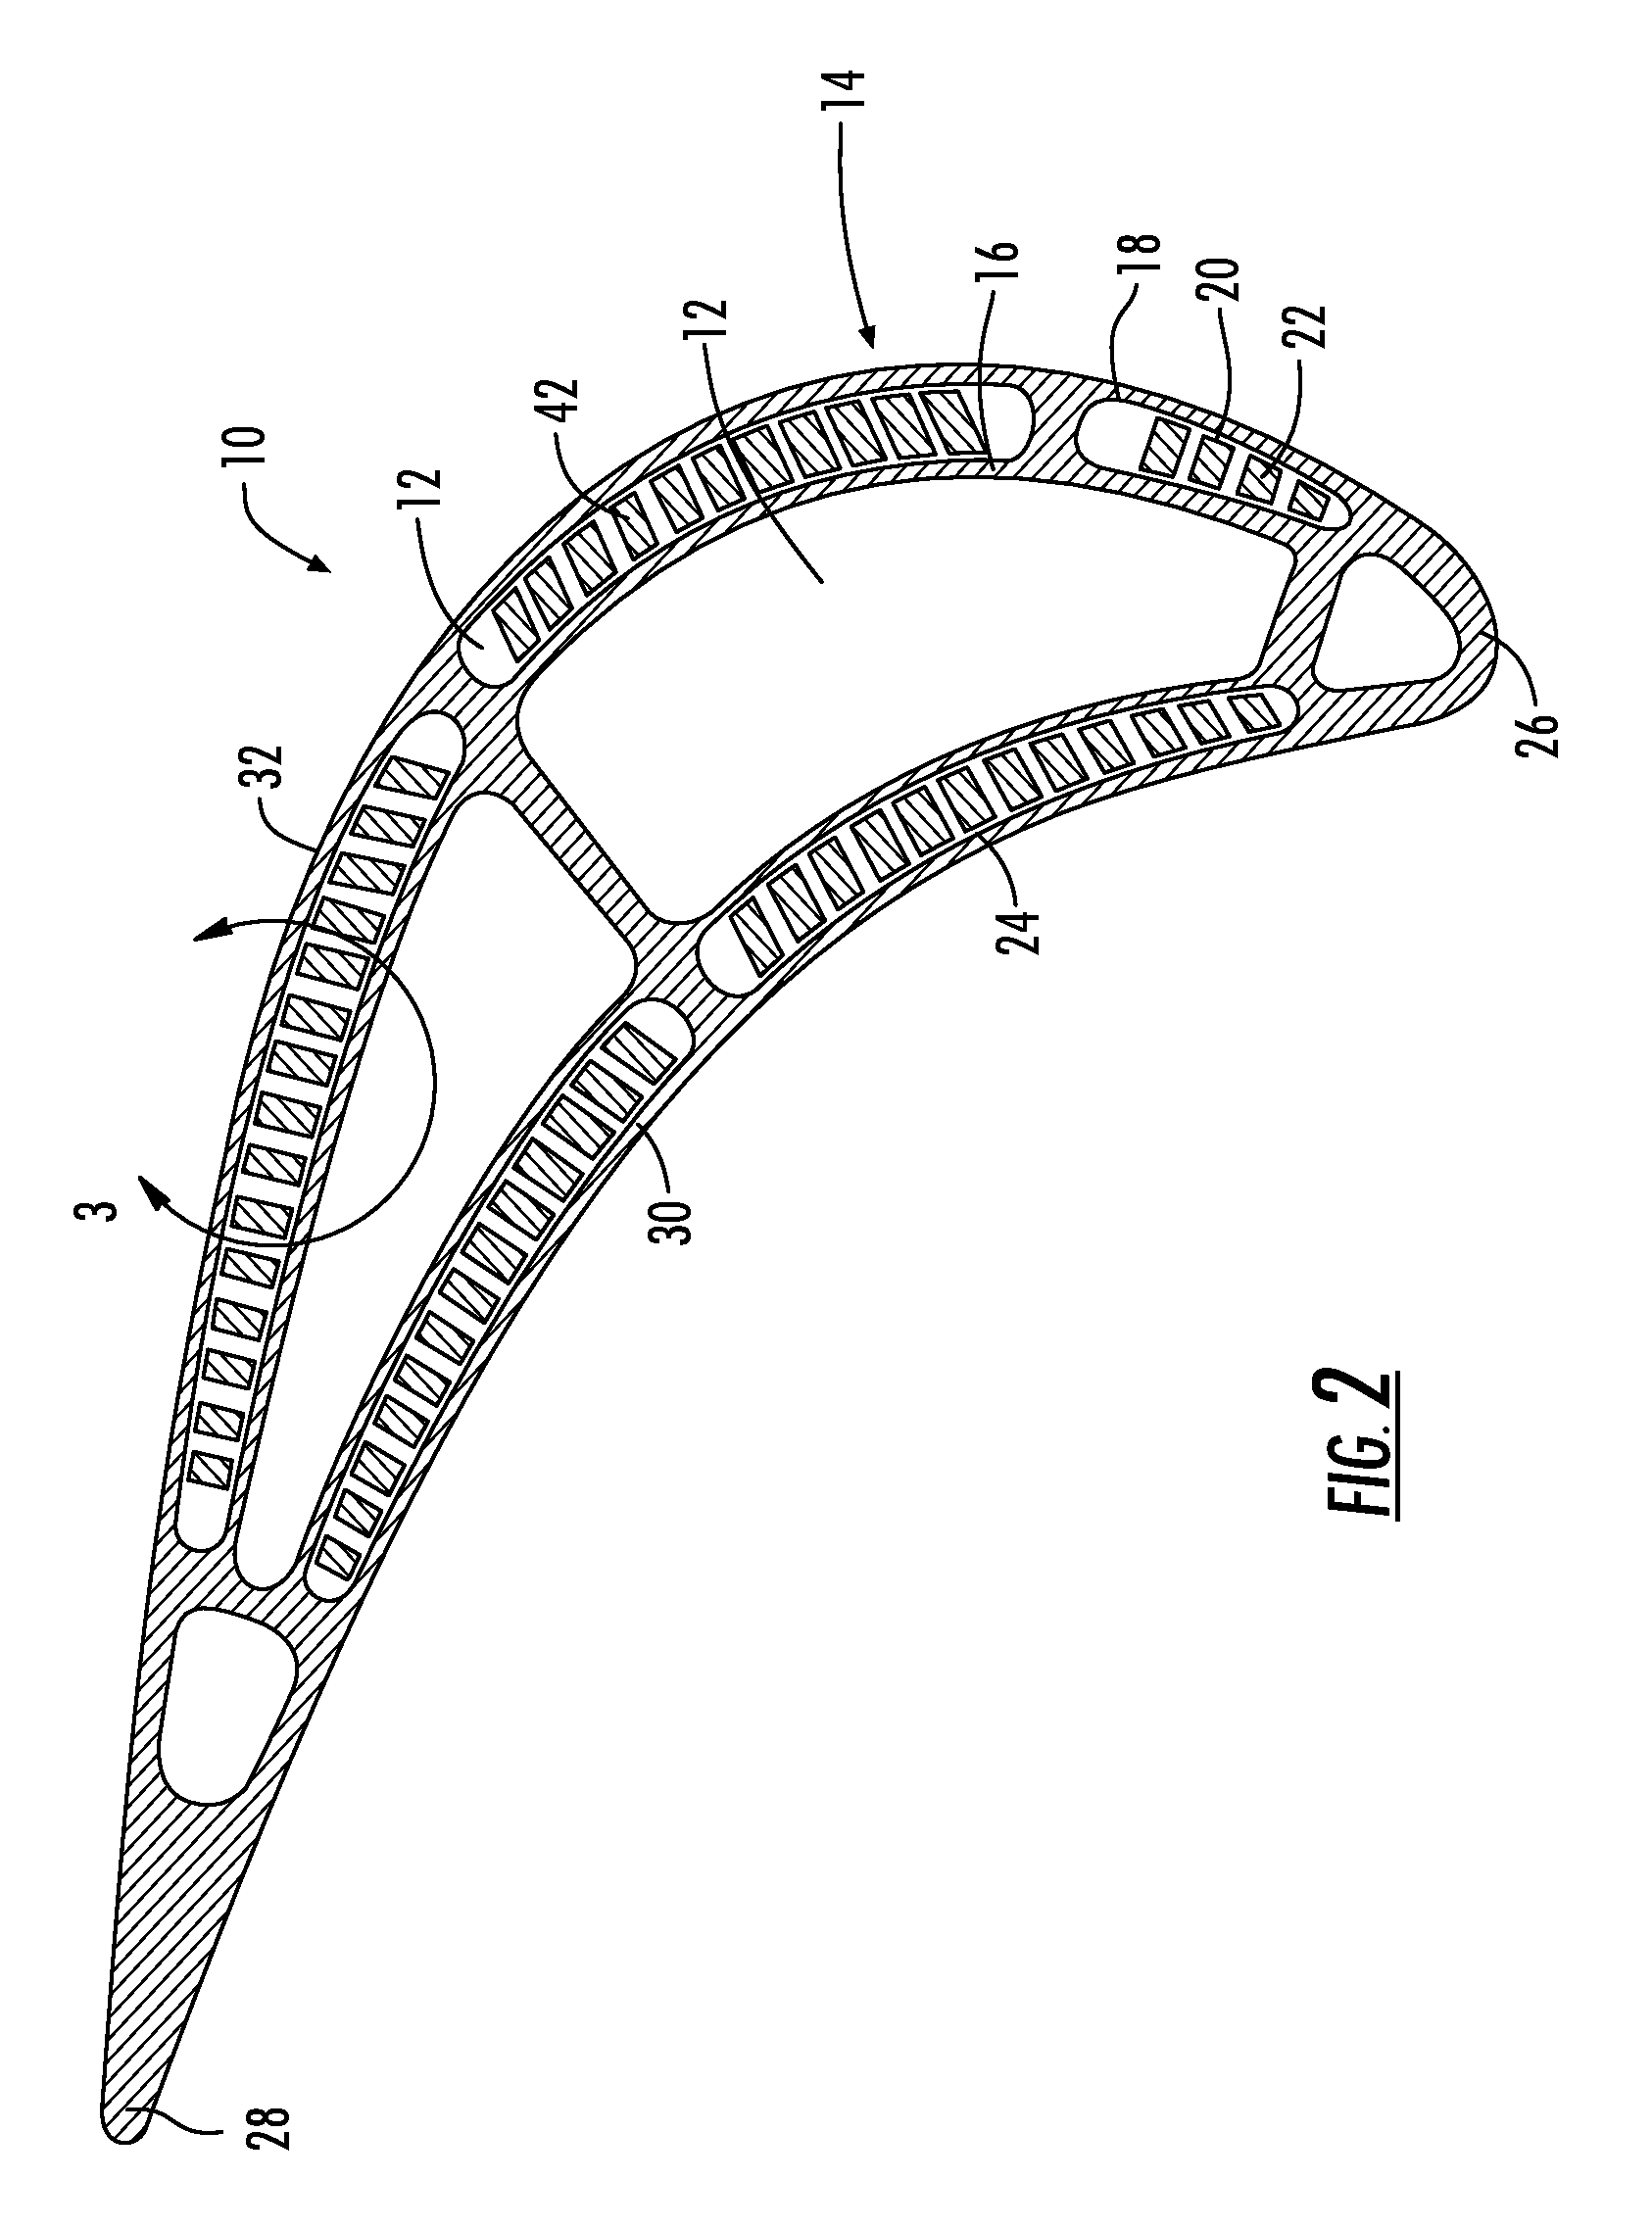 Turbine airfoil with a compliant outer wall